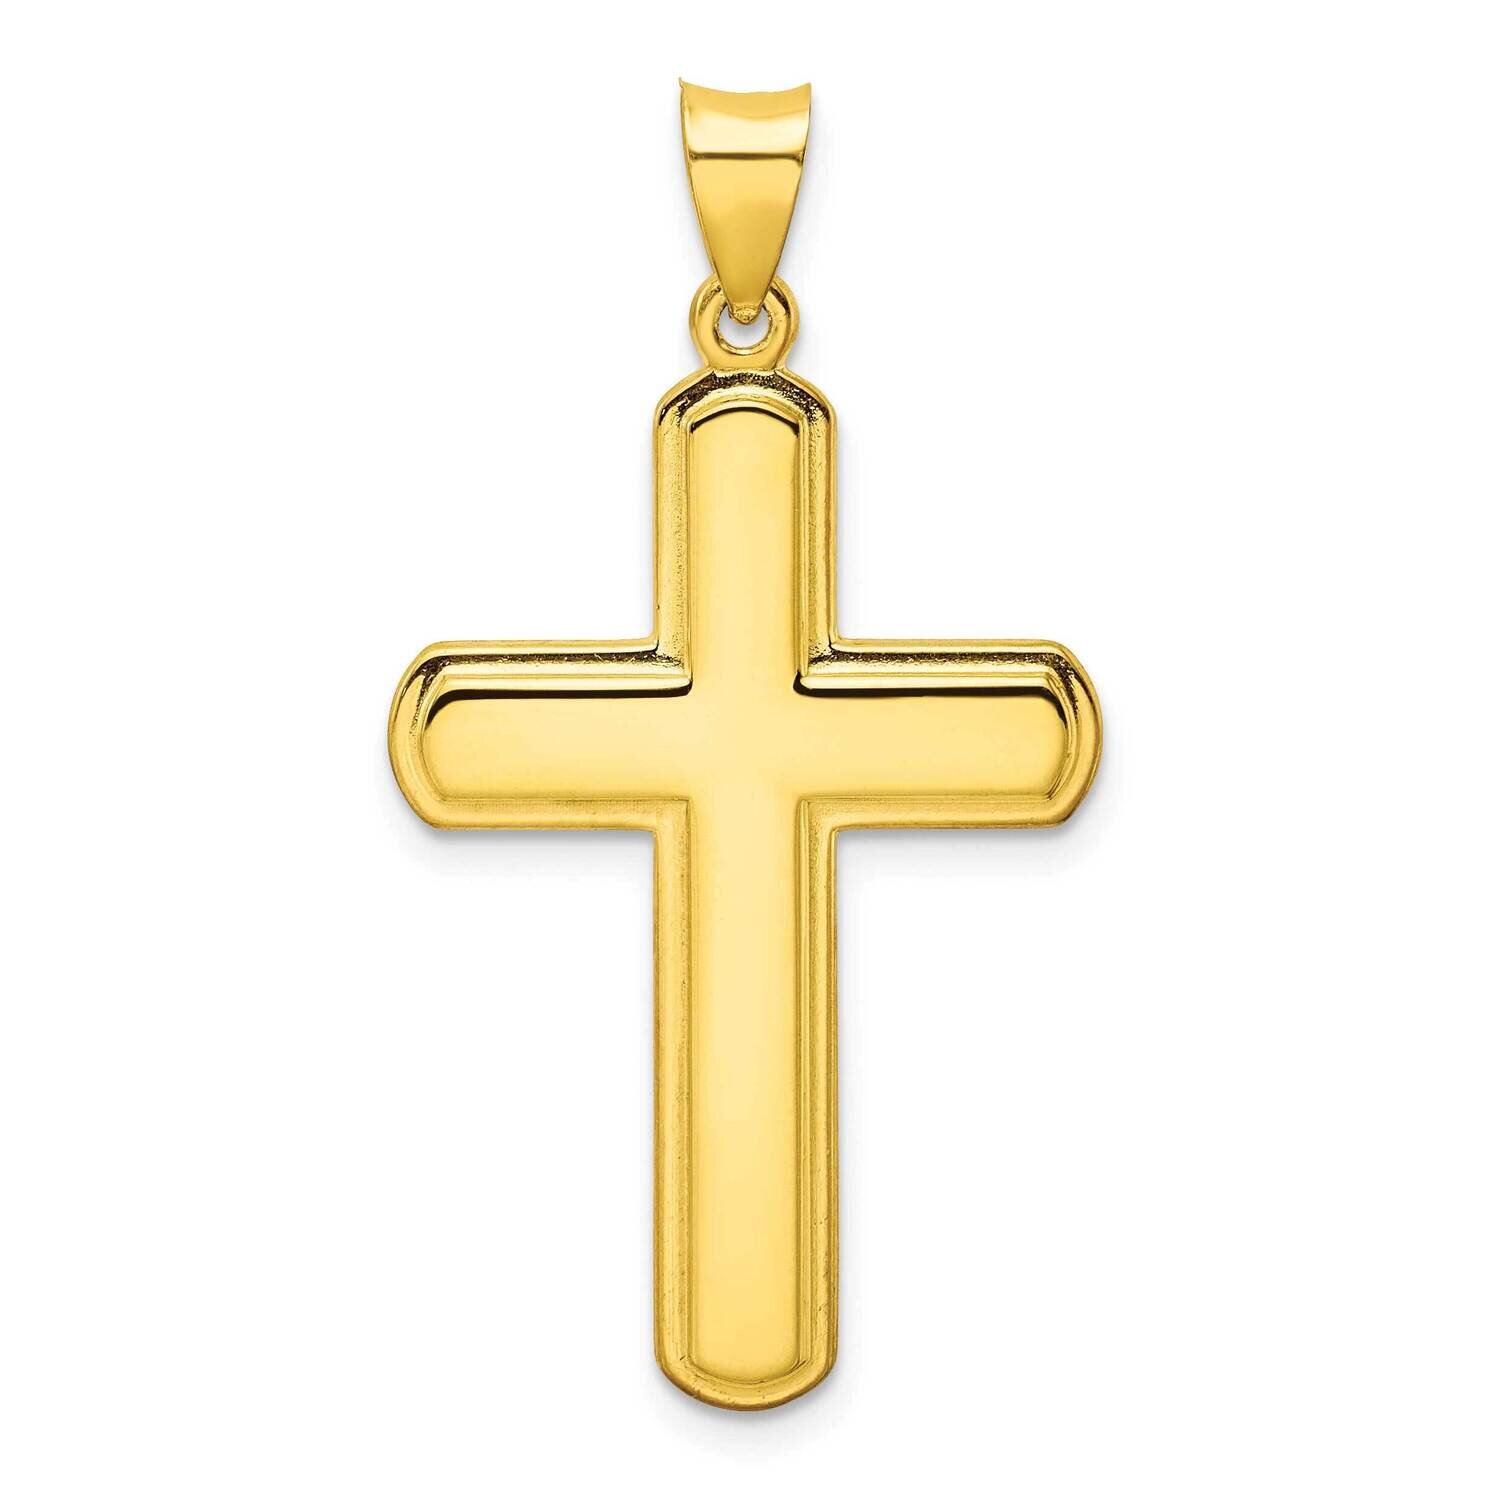 Polished Solid Cross Pendant Sterling Silver Gold-Tone QC11123